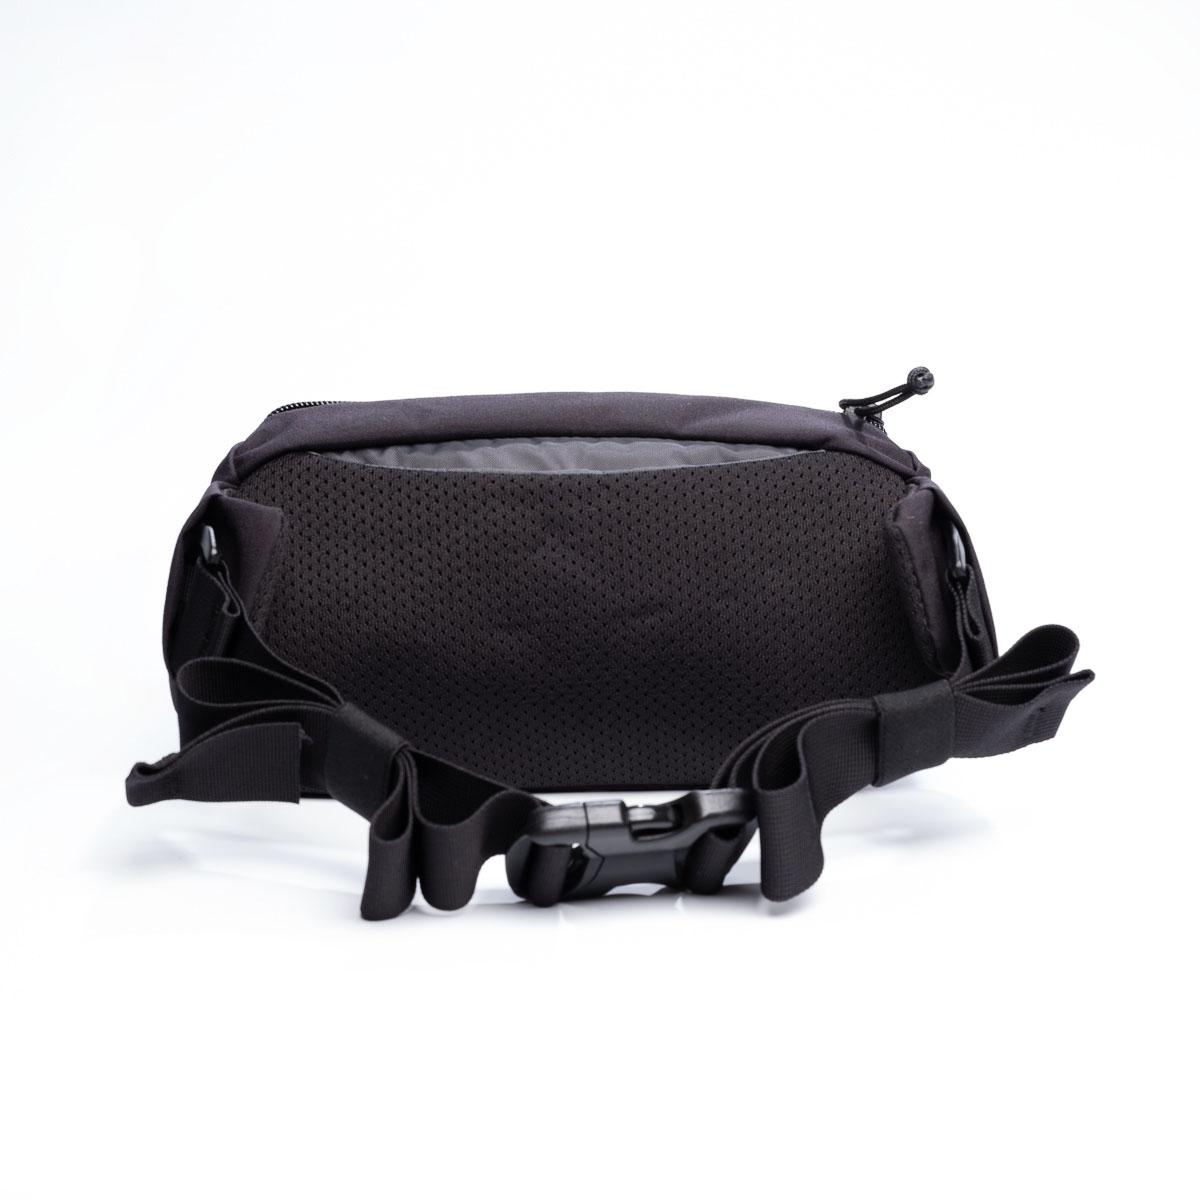 Mystery Ranch Forager Hip Pack